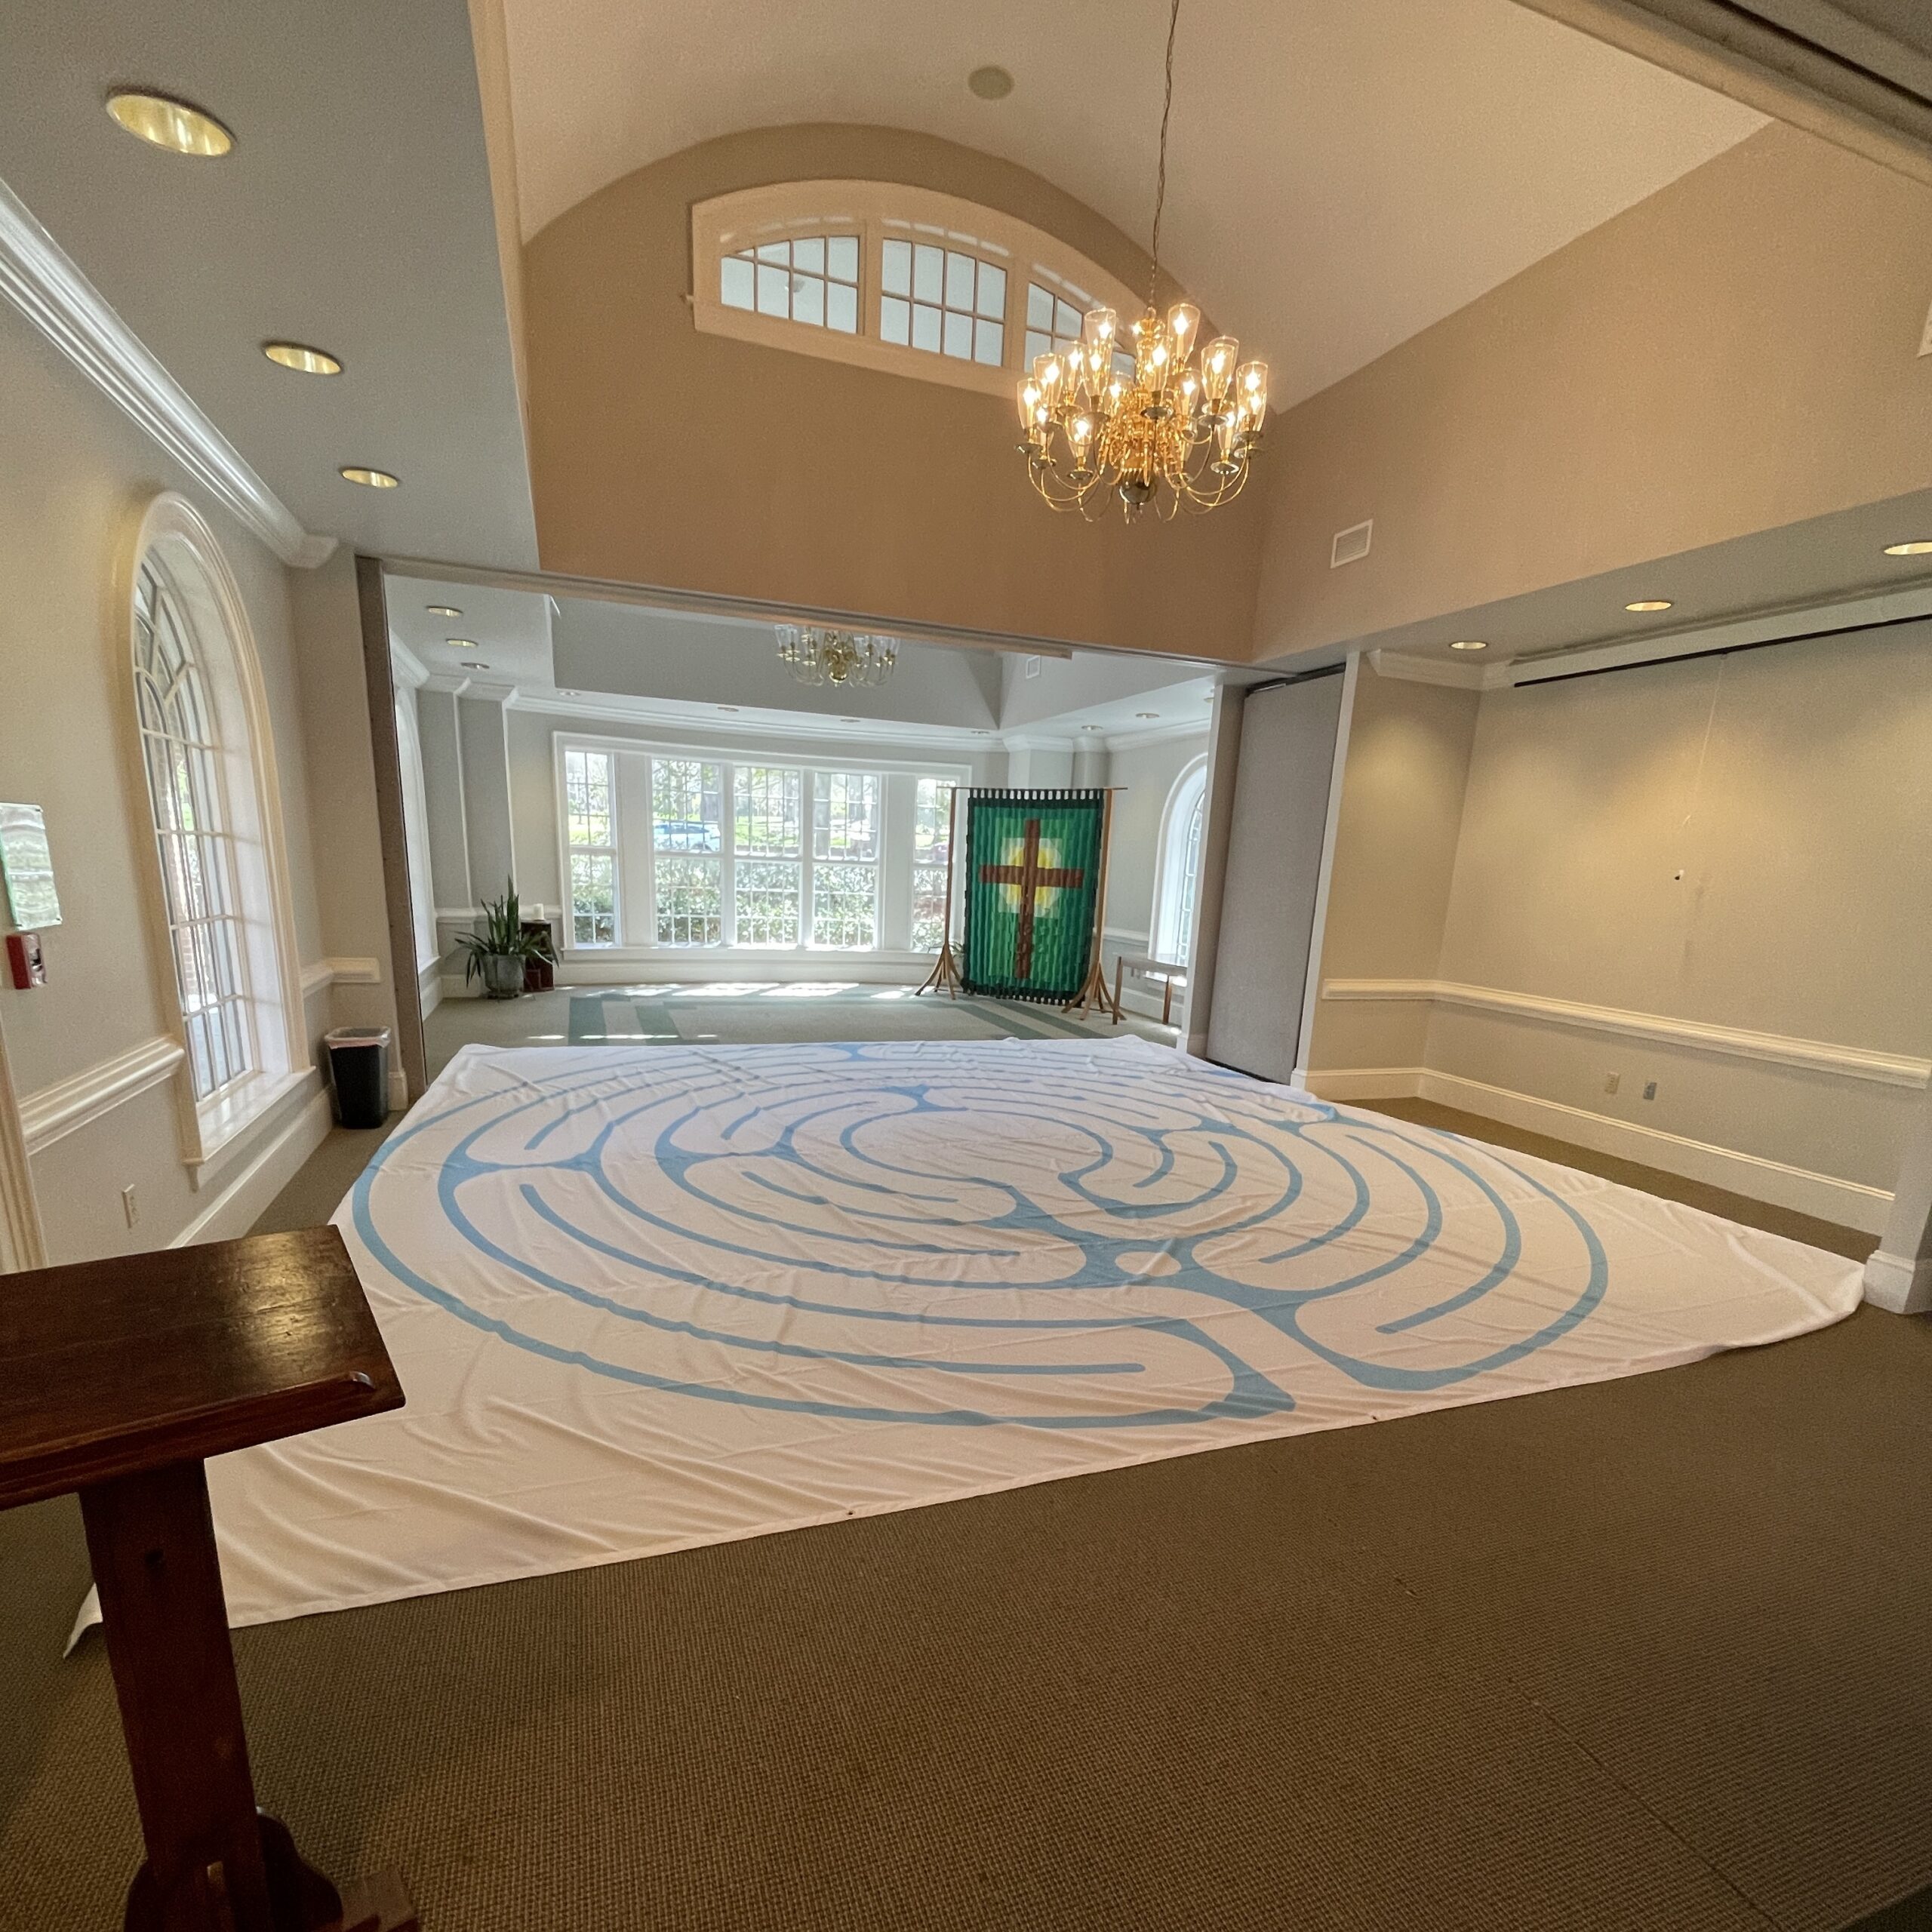 Large indoor labyrinth laid out on the floor of a spacious room with a chandelier and windows, designed for quiet prayer.